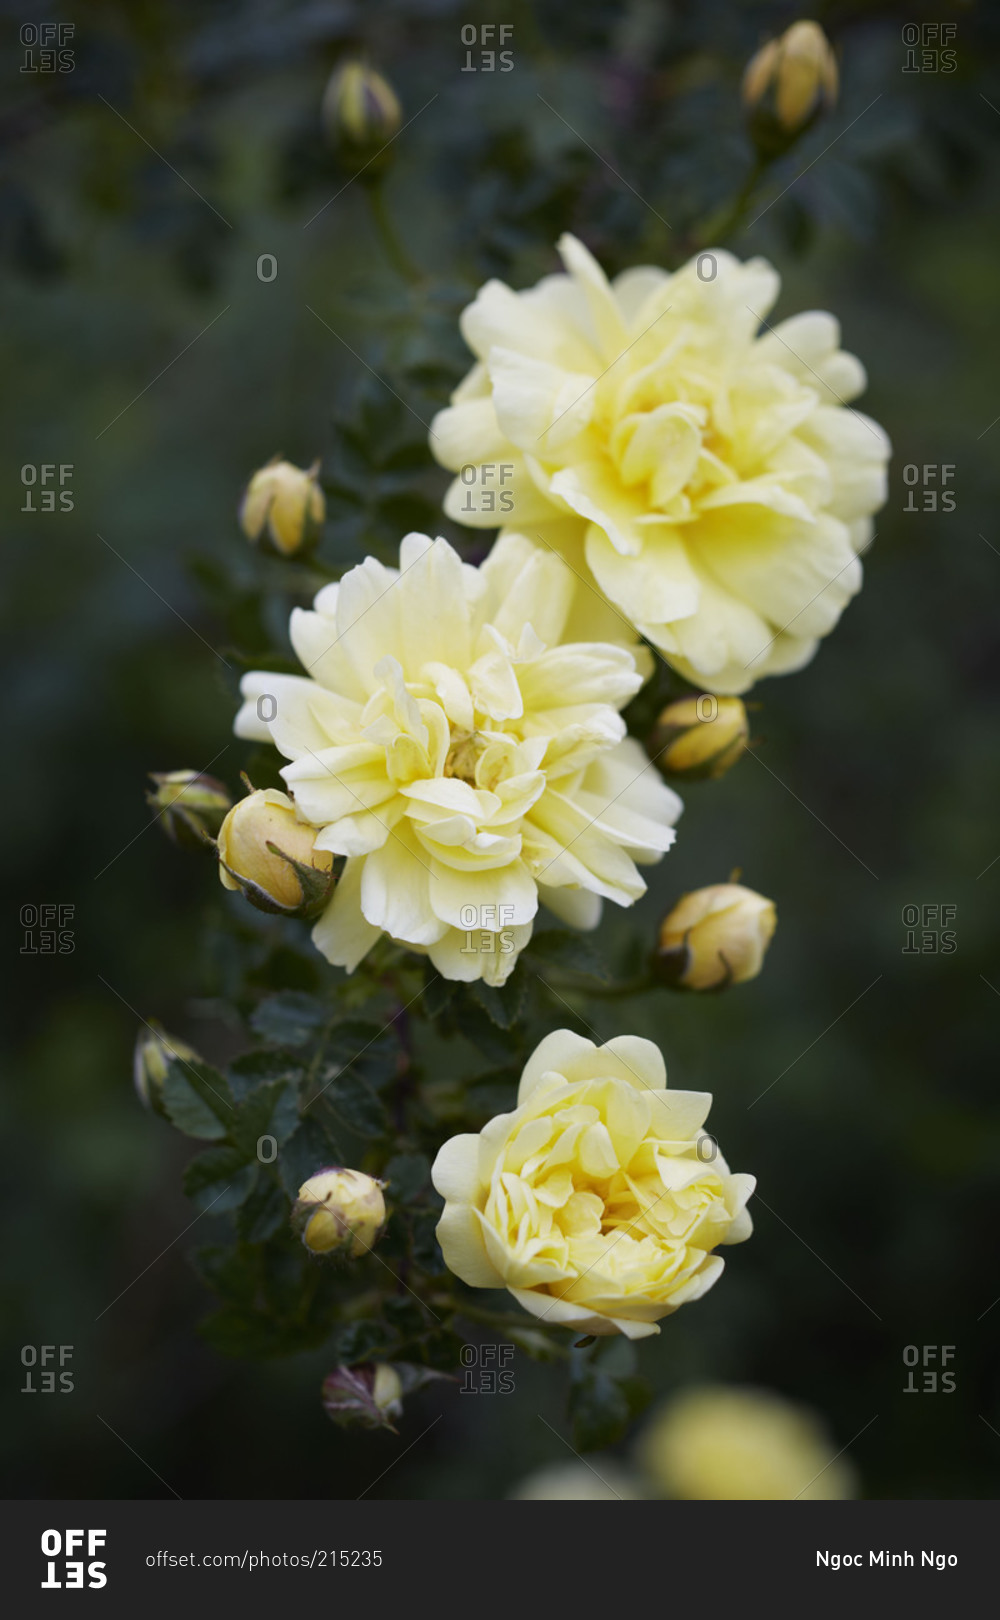 Yellow roses in bloom